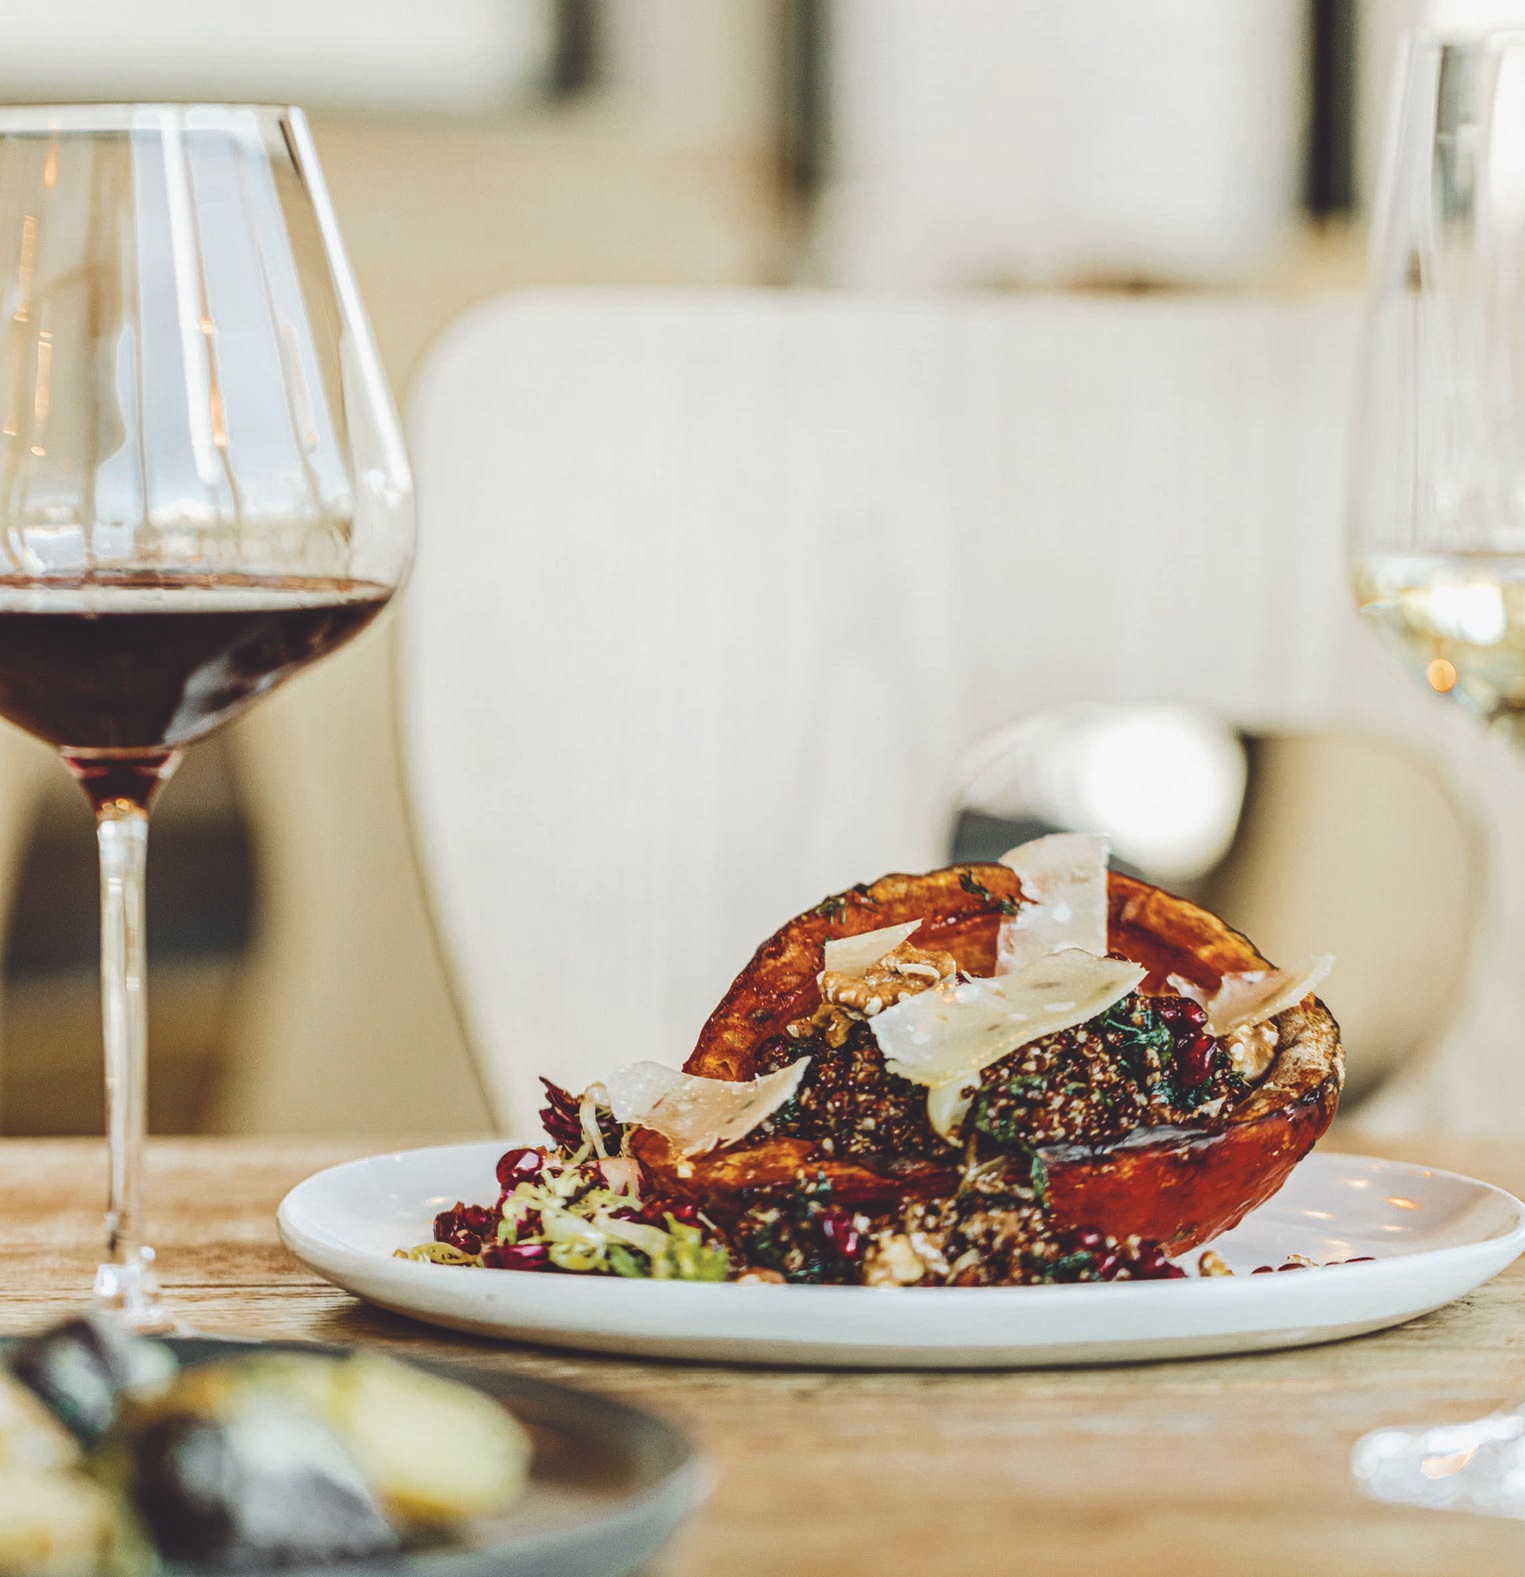 Roasted red Kuri squash, quinoa, Parmesan, kale and pomegranate is a must. PHOTO BY MARQUEL PATTON